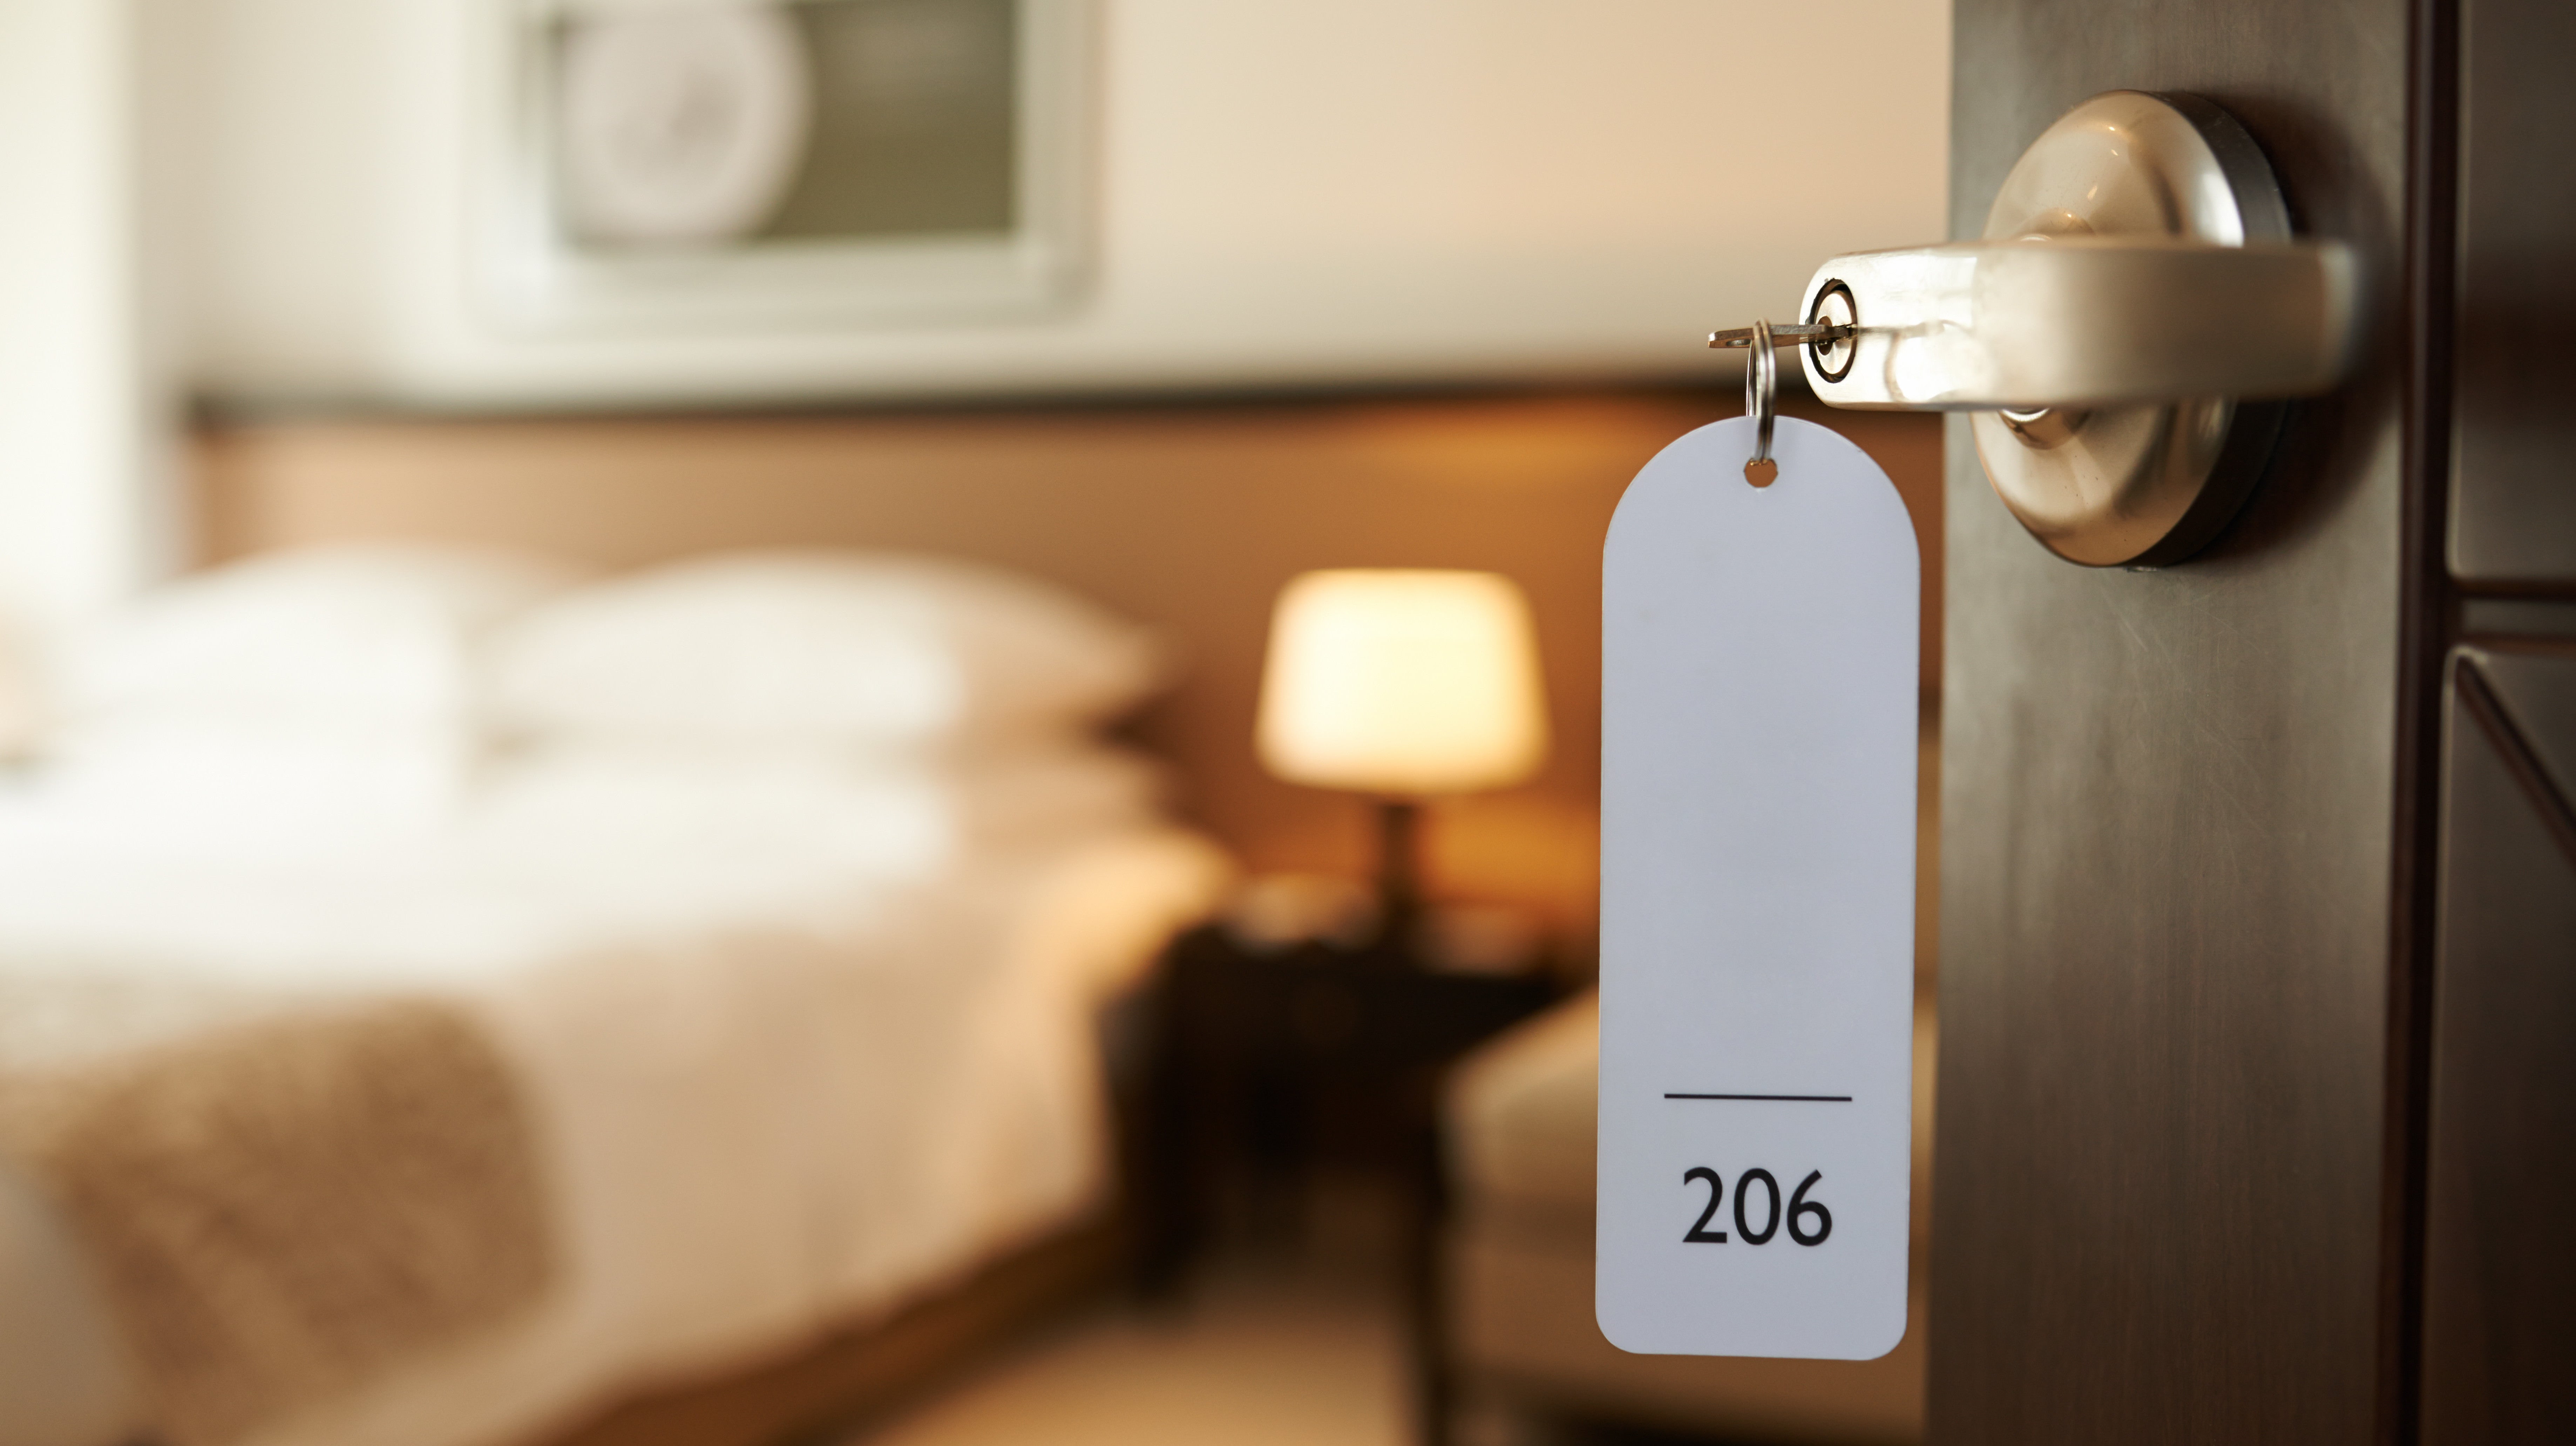 Book Hotel Rooms At Wholesale Prices Using This Extension